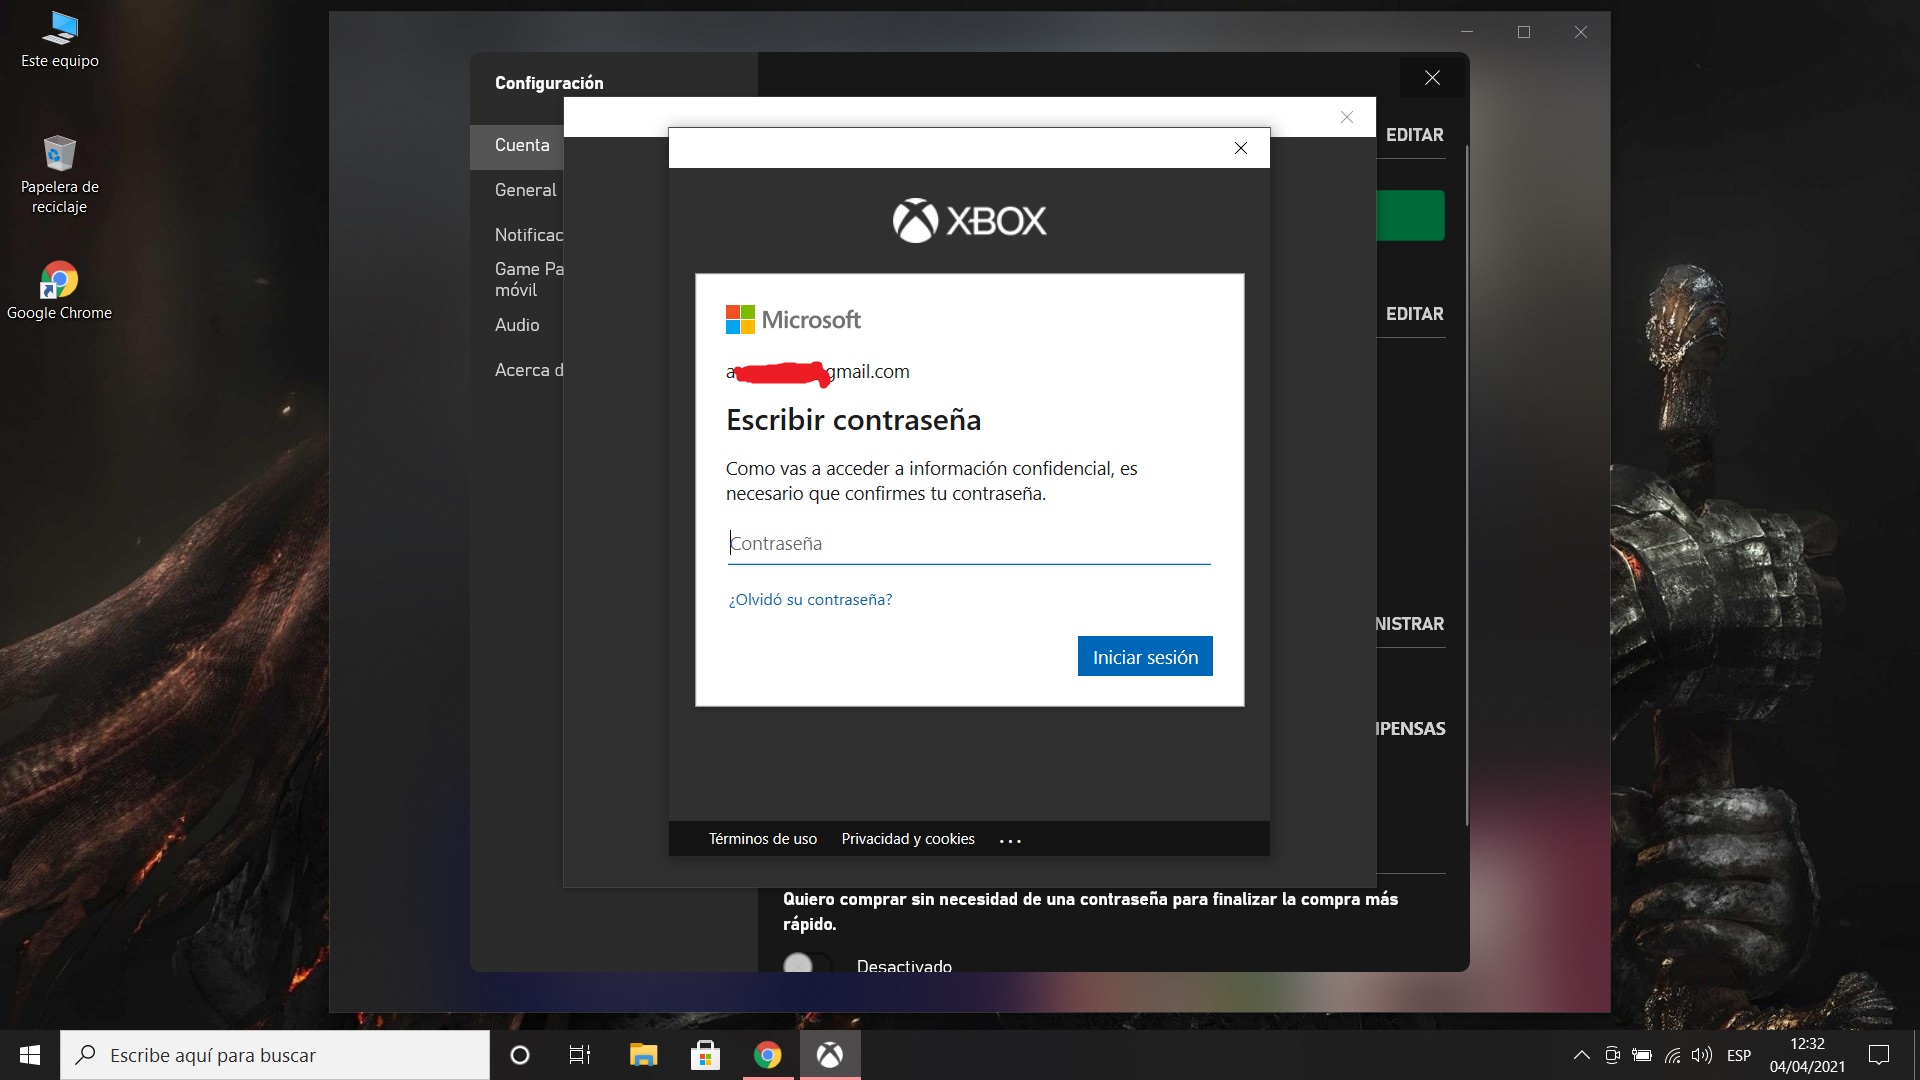 Problem with MS account in W10 and Xbox app 77743f1f-62a0-4e84-bf9a-c3929c1c5f62?upload=true.jpg